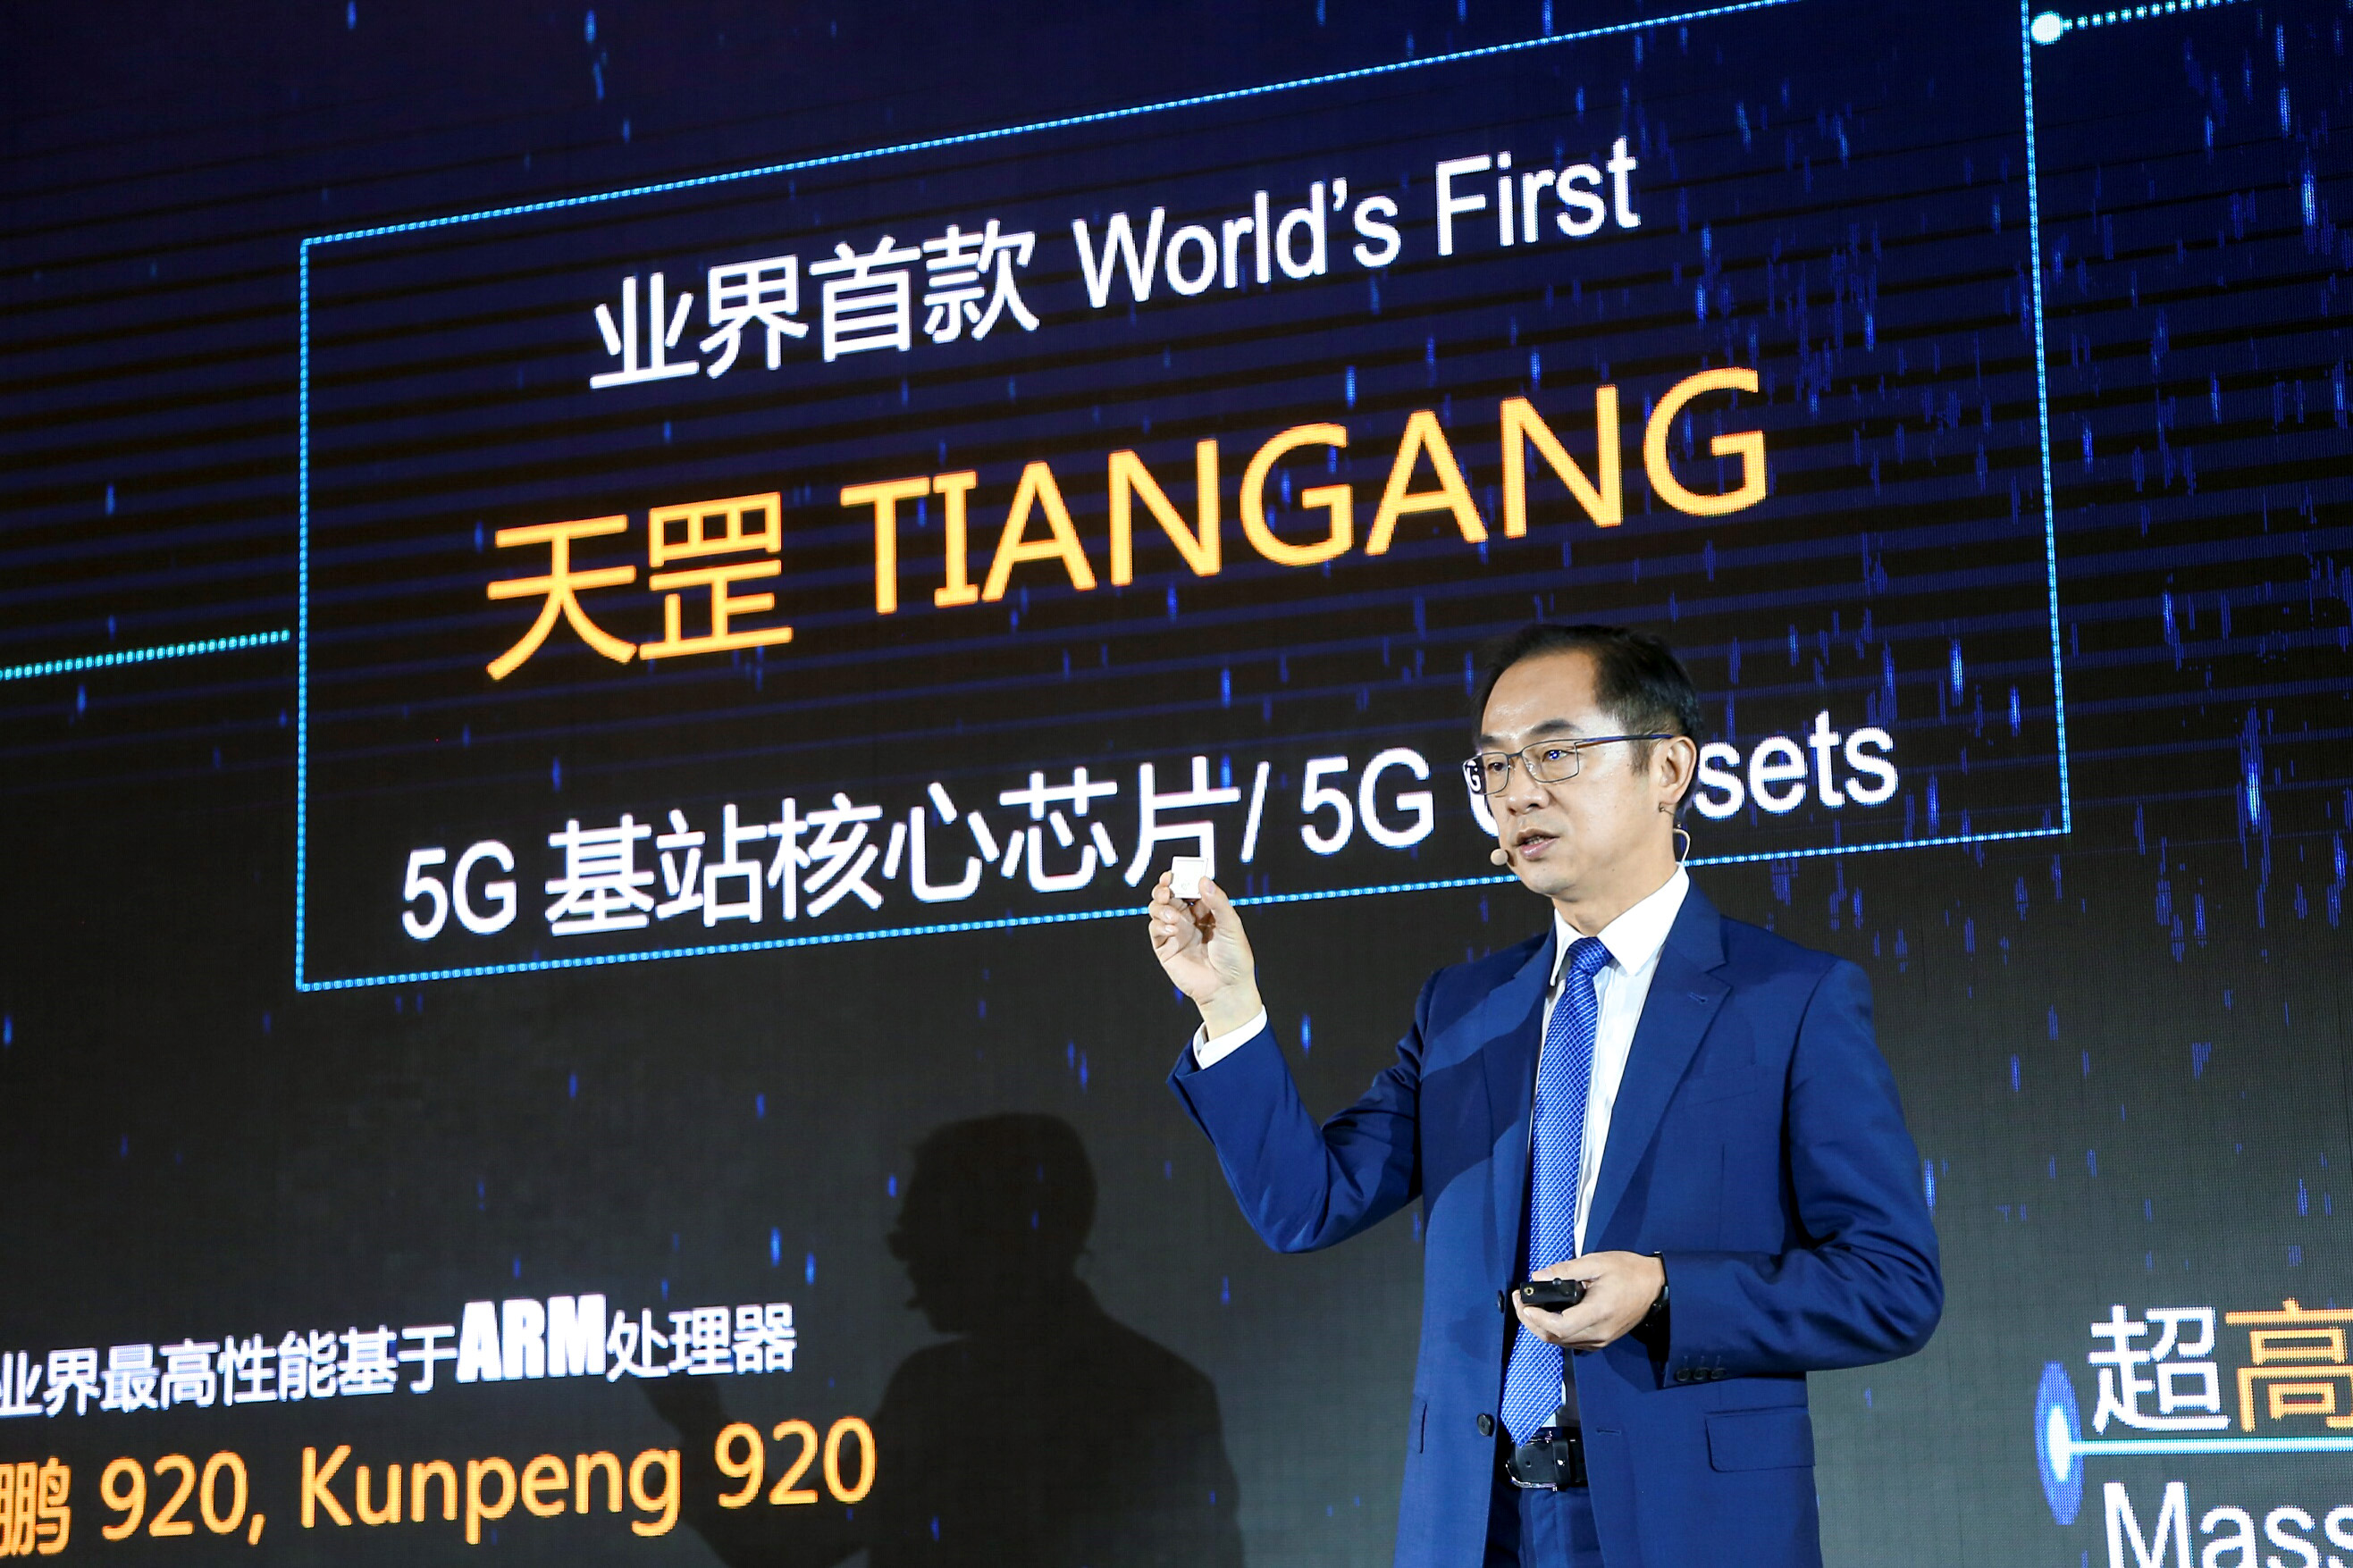 Ryan Ding, Huawei Executive Director of the Board, delivering a keynote speech during the launching their 5G base station core chip.